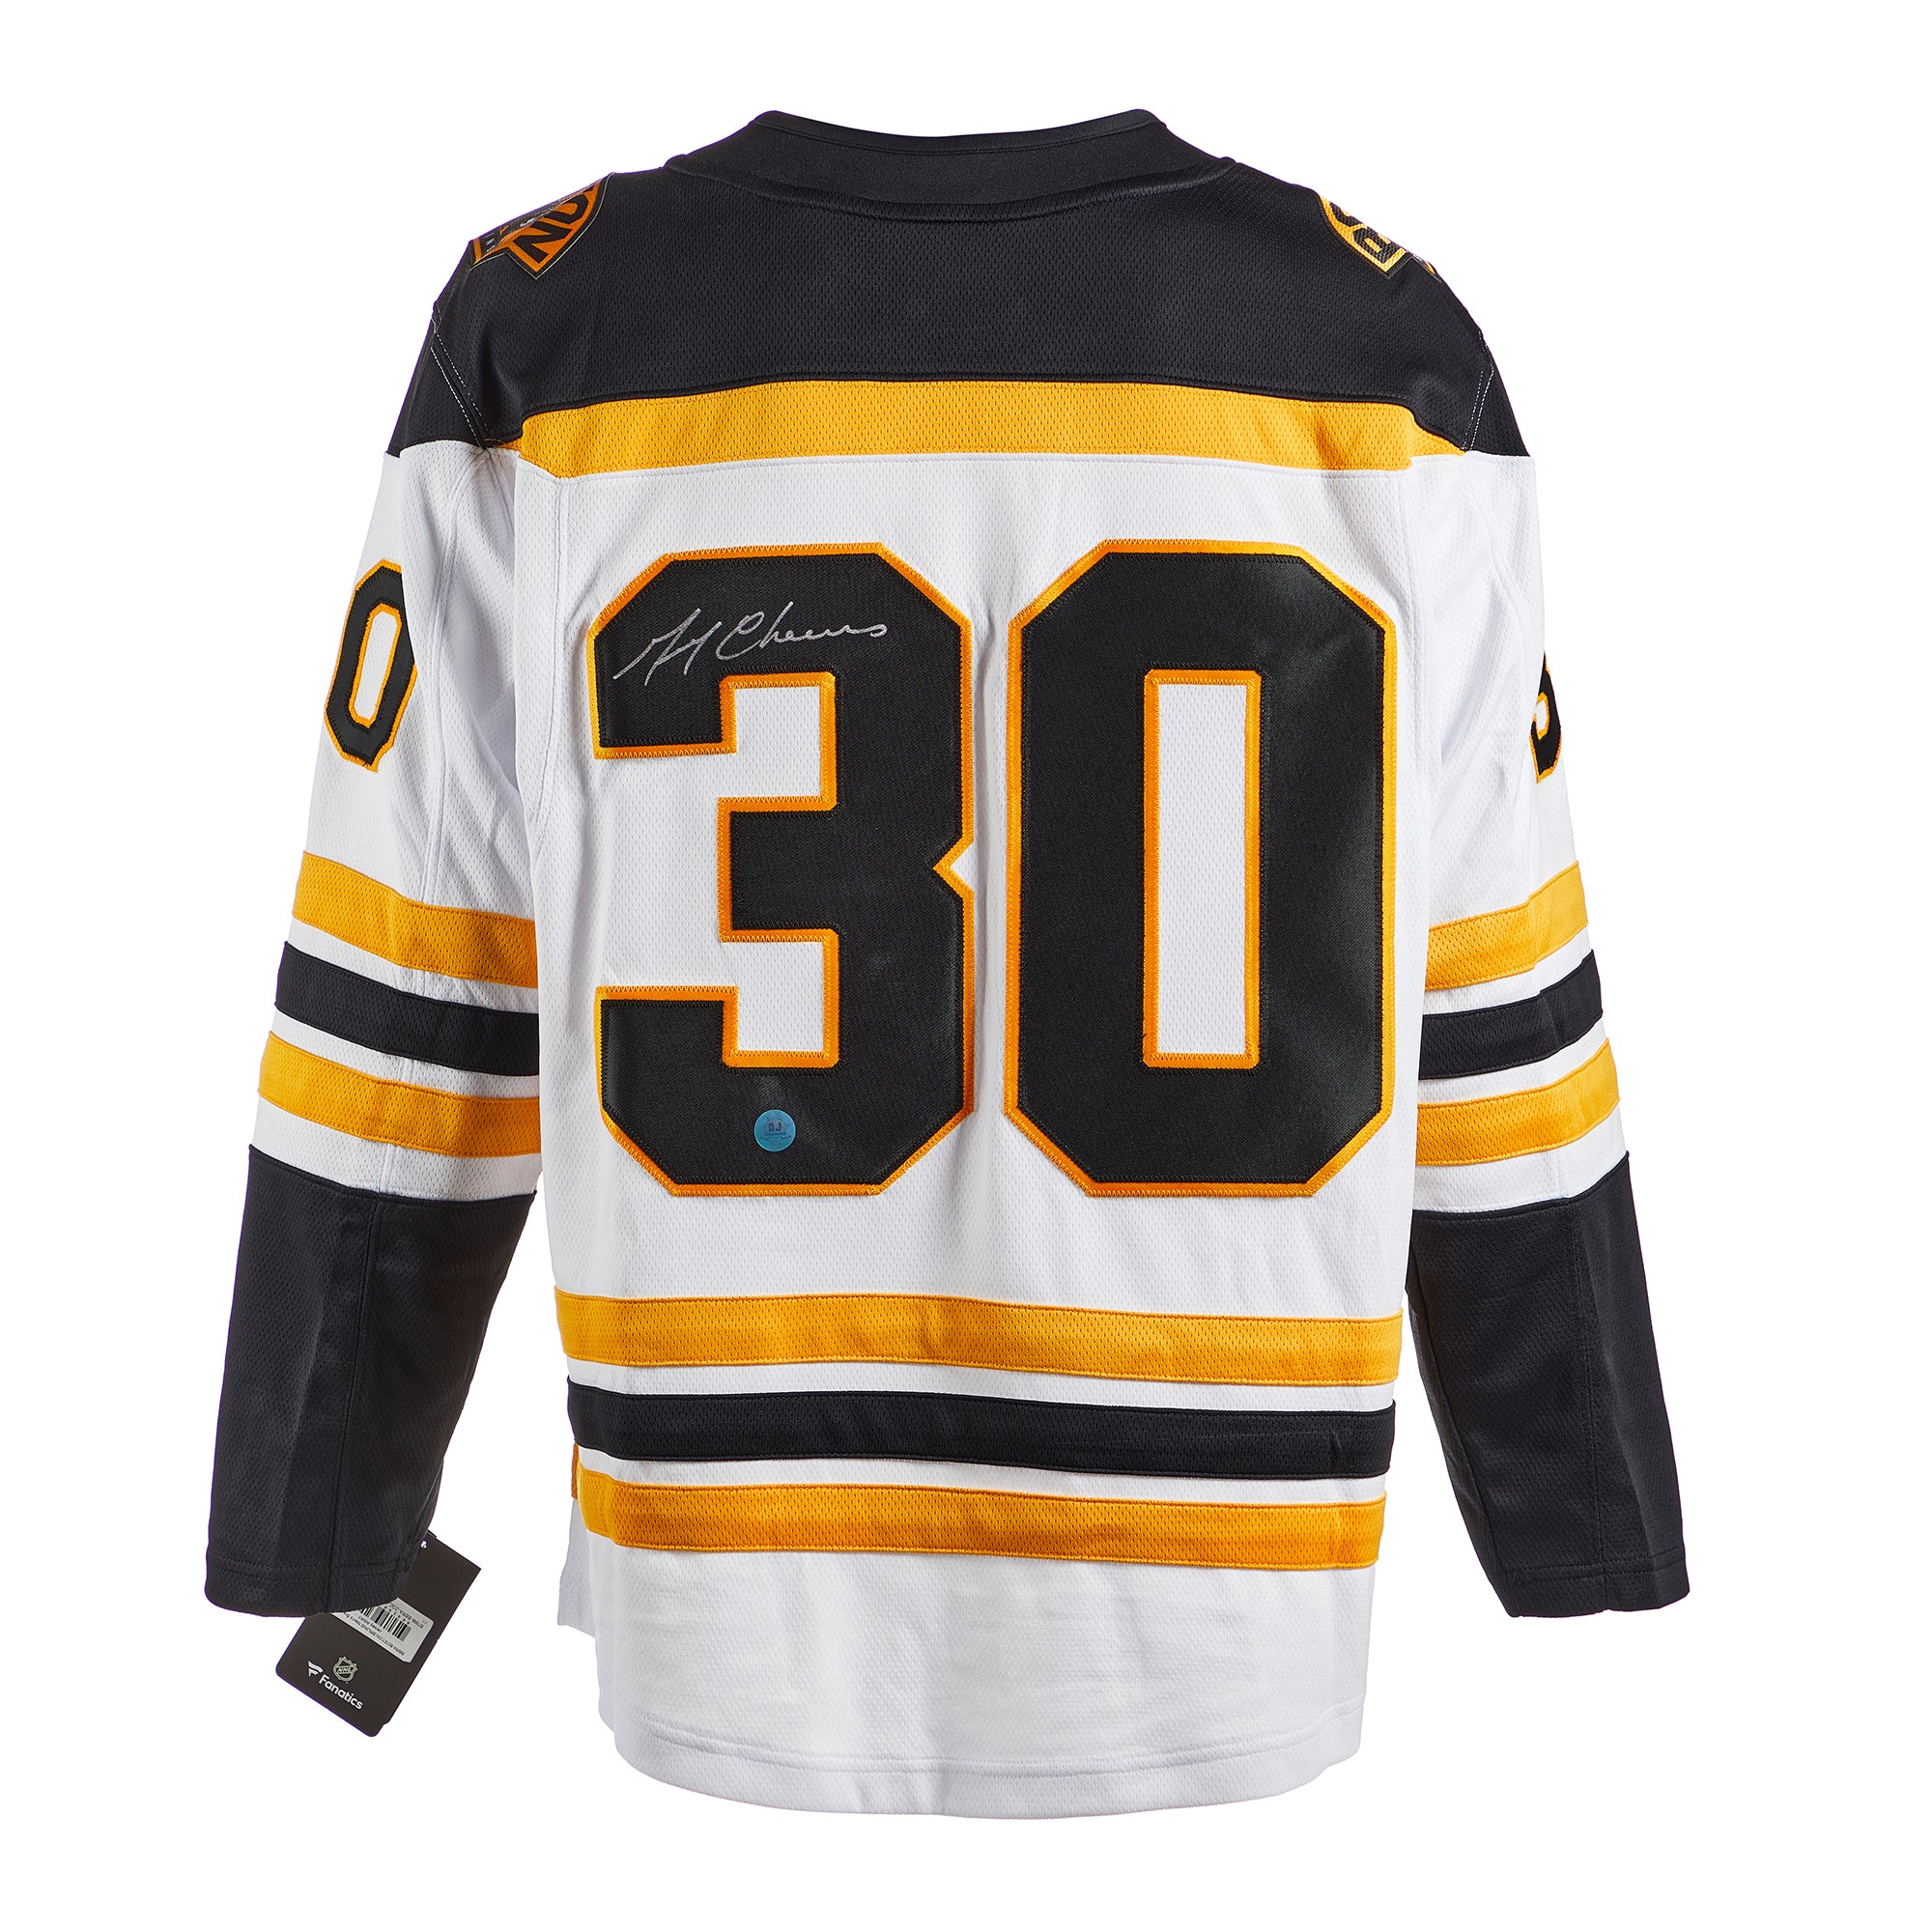 Terry O'Reilly Boston Bruins Autographed Signed White Fanatics Jersey